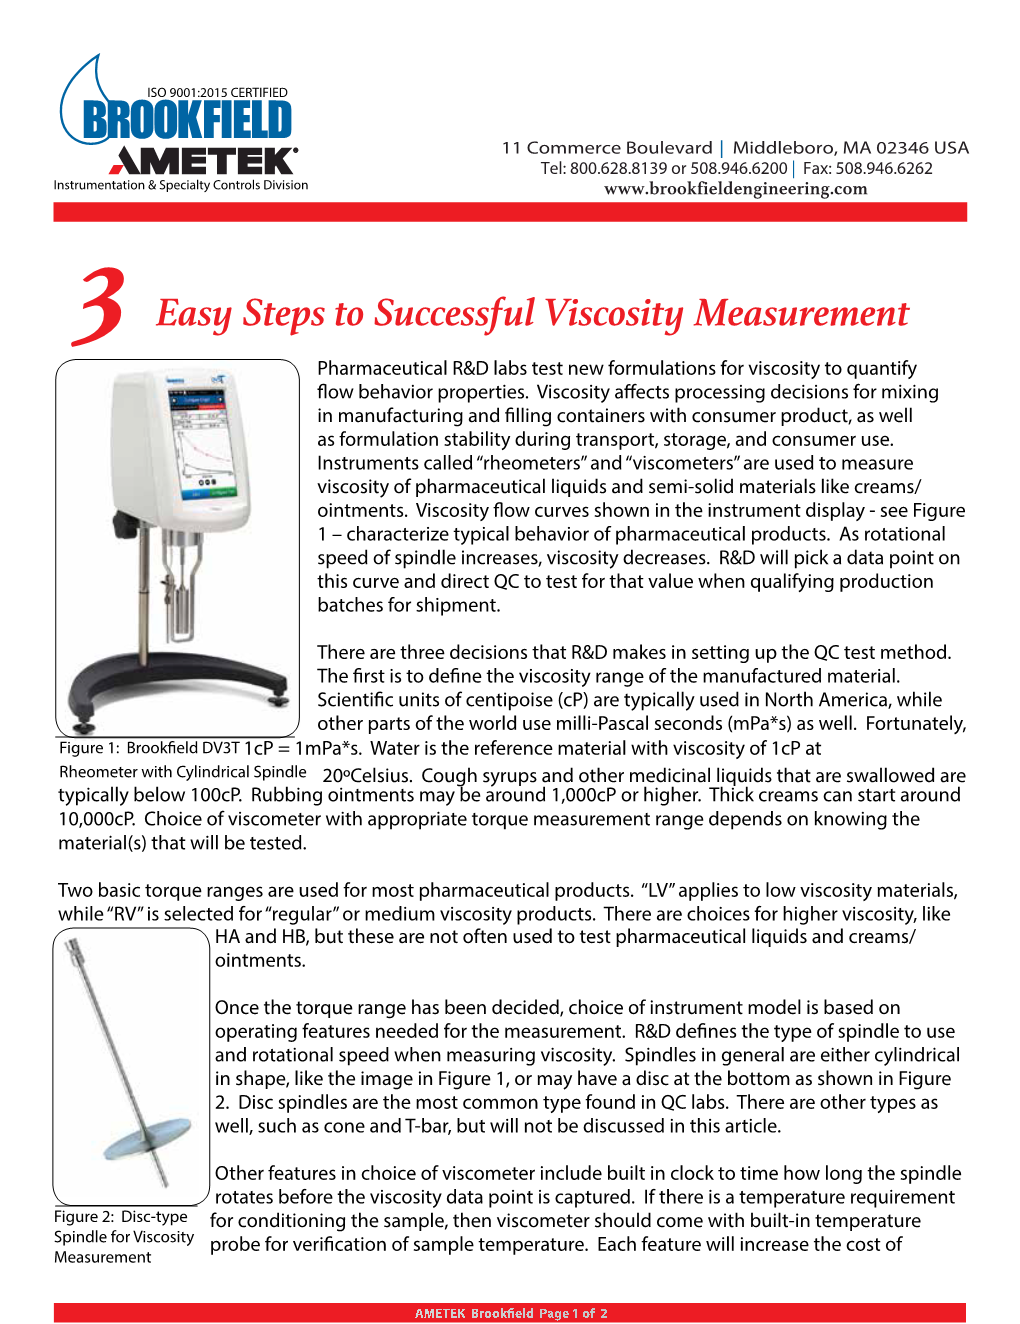 3 Easy Steps to Successful Viscosity Measurement Pharmaceutical R&D Labs Test New Formulations for Viscosity to Quantify Flow Behavior Properties